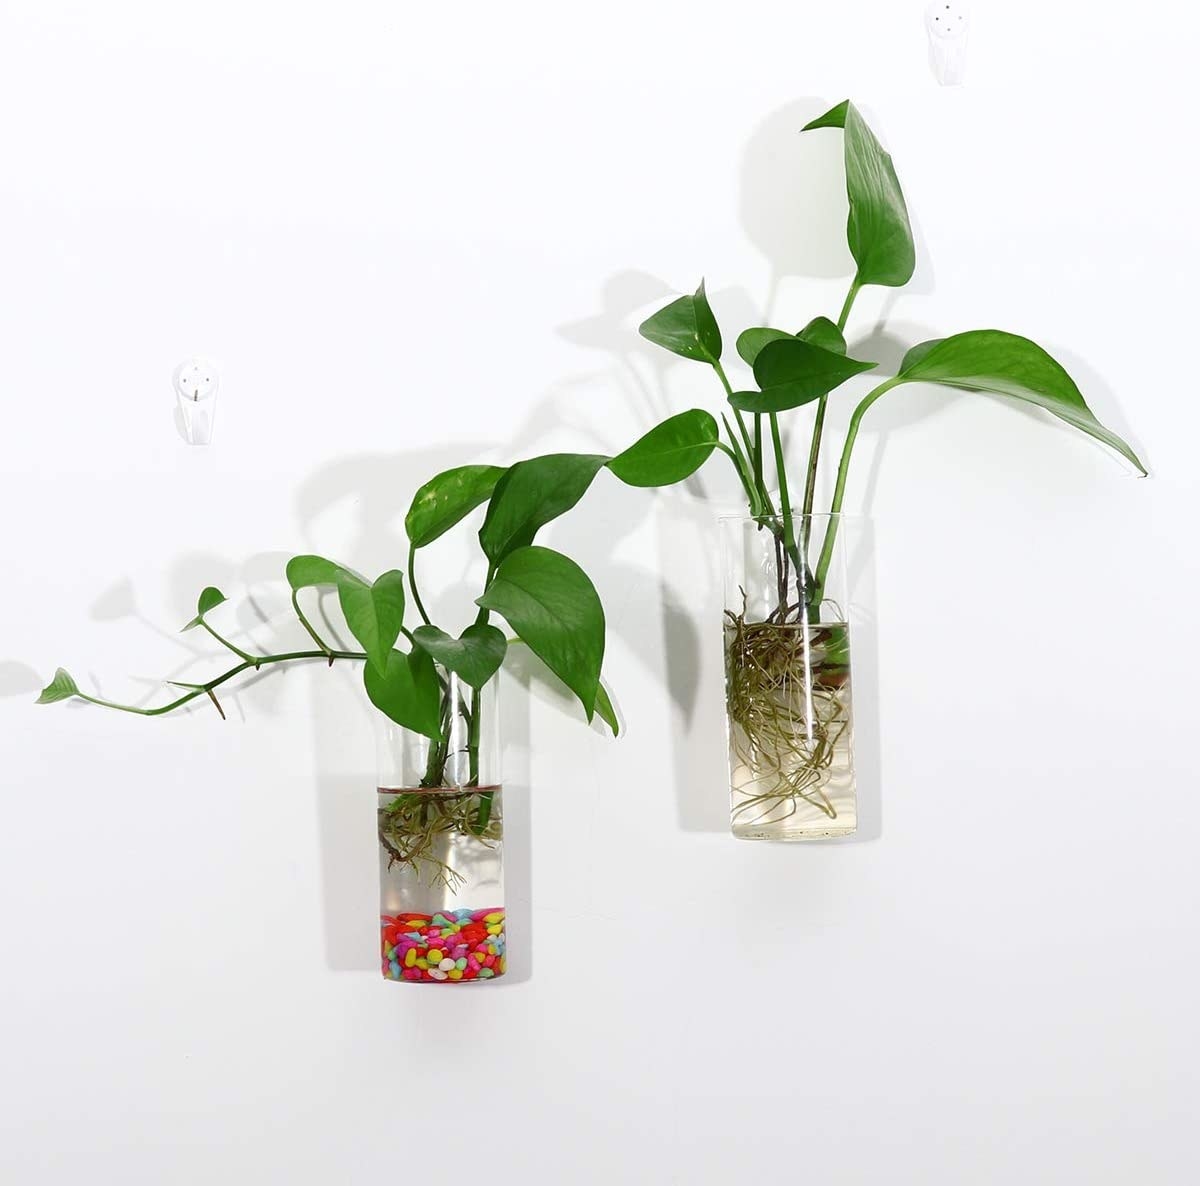 Two pothos propagations in two vases on a wall